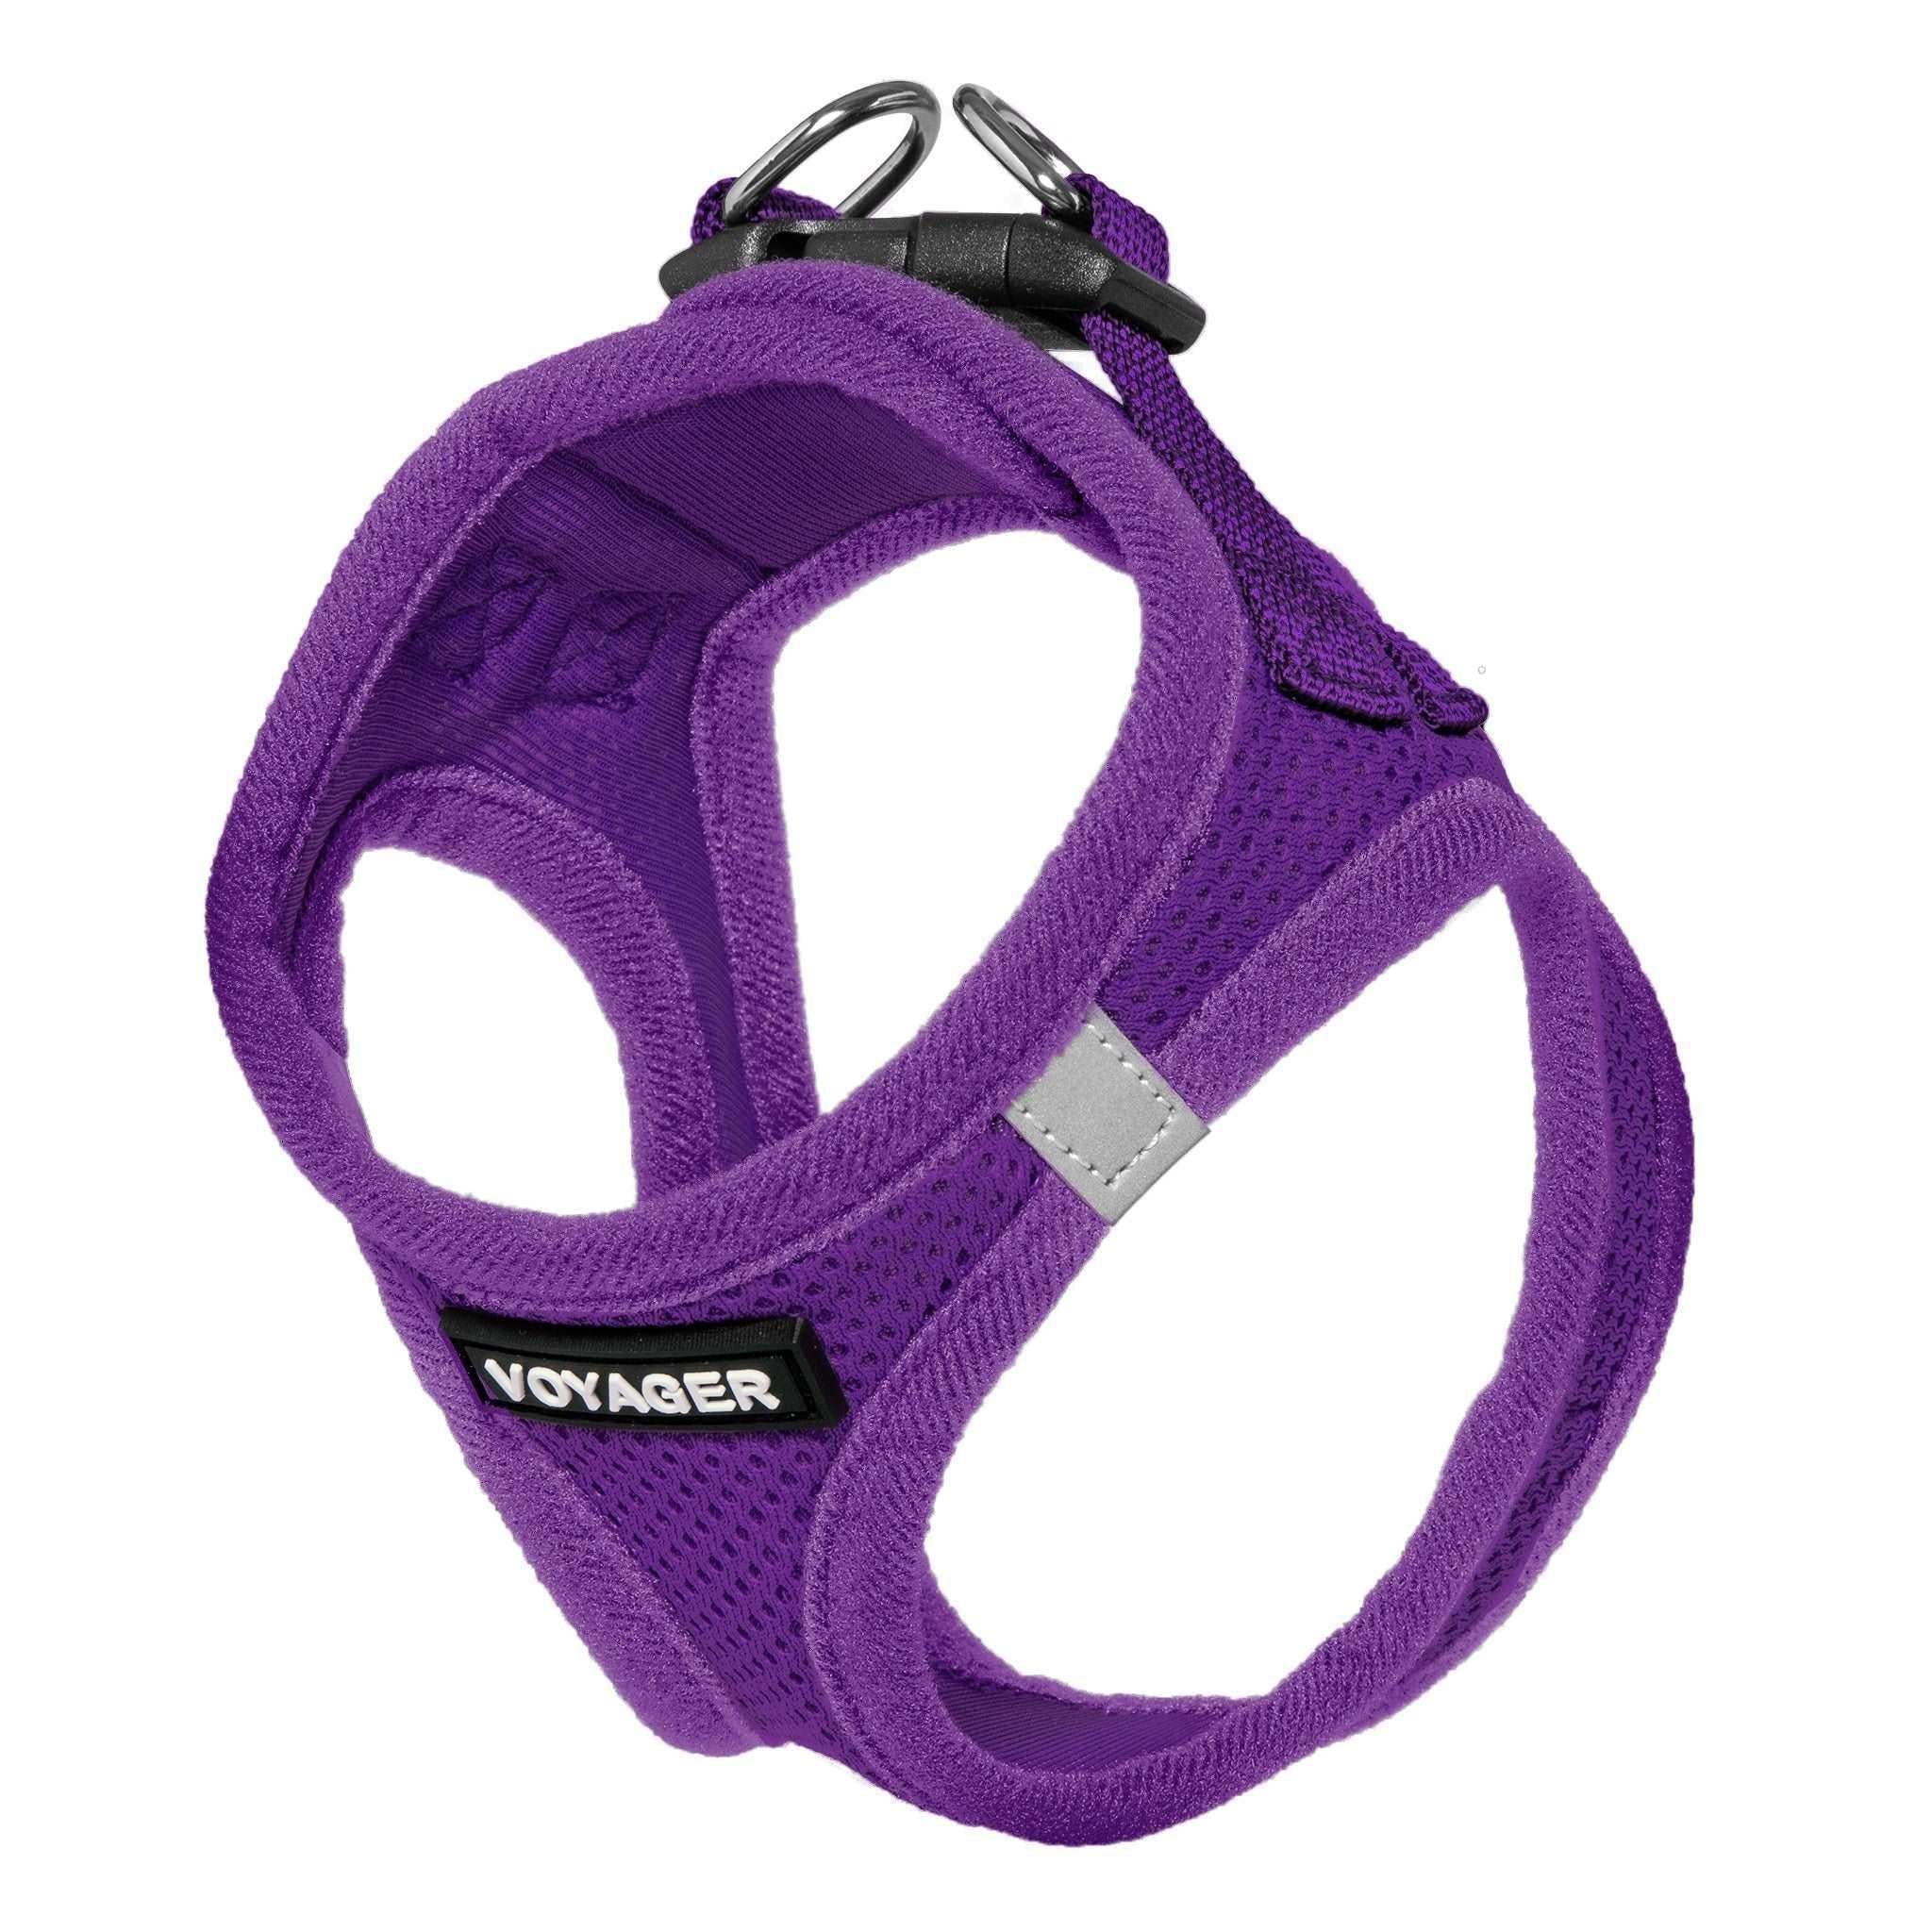 VOYAGER Step-In Air Pet Harness in Purple with Matching Trim and Webbing - Expanded